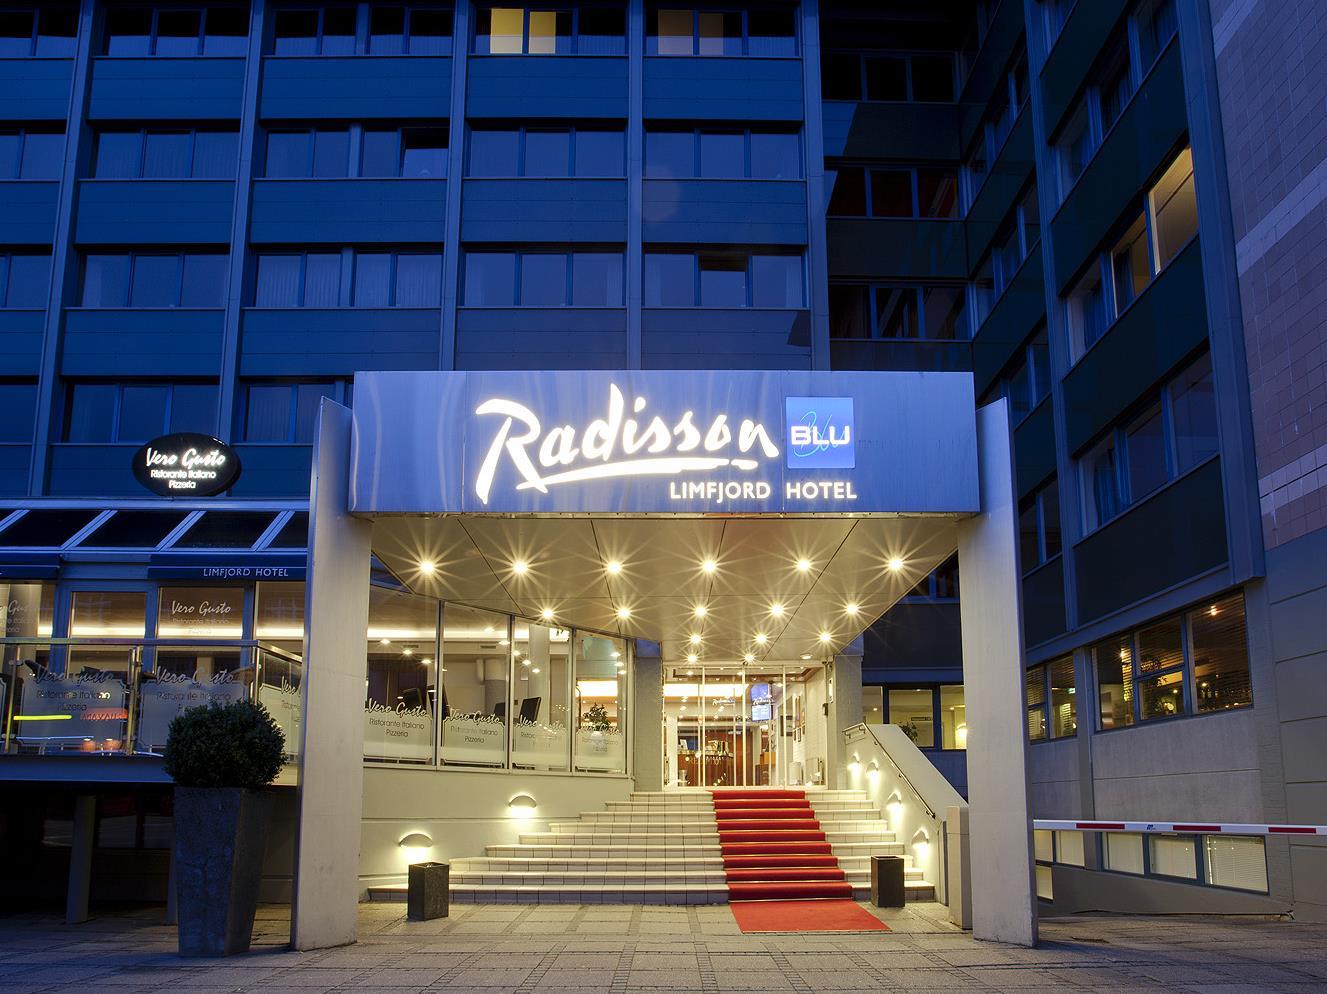 Radisson Blu Limfjord Hotel Aalborg Aalborg FAQ 2017, What facilities are there in Radisson Blu Limfjord Hotel Aalborg Aalborg 2017, What Languages Spoken are Supported in Radisson Blu Limfjord Hotel Aalborg Aalborg 2017, Which payment cards are accepted in Radisson Blu Limfjord Hotel Aalborg Aalborg , Aalborg Radisson Blu Limfjord Hotel Aalborg room facilities and services Q&A 2017, Aalborg Radisson Blu Limfjord Hotel Aalborg online booking services 2017, Aalborg Radisson Blu Limfjord Hotel Aalborg address 2017, Aalborg Radisson Blu Limfjord Hotel Aalborg telephone number 2017,Aalborg Radisson Blu Limfjord Hotel Aalborg map 2017, Aalborg Radisson Blu Limfjord Hotel Aalborg traffic guide 2017, how to go Aalborg Radisson Blu Limfjord Hotel Aalborg, Aalborg Radisson Blu Limfjord Hotel Aalborg booking online 2017, Aalborg Radisson Blu Limfjord Hotel Aalborg room types 2017.